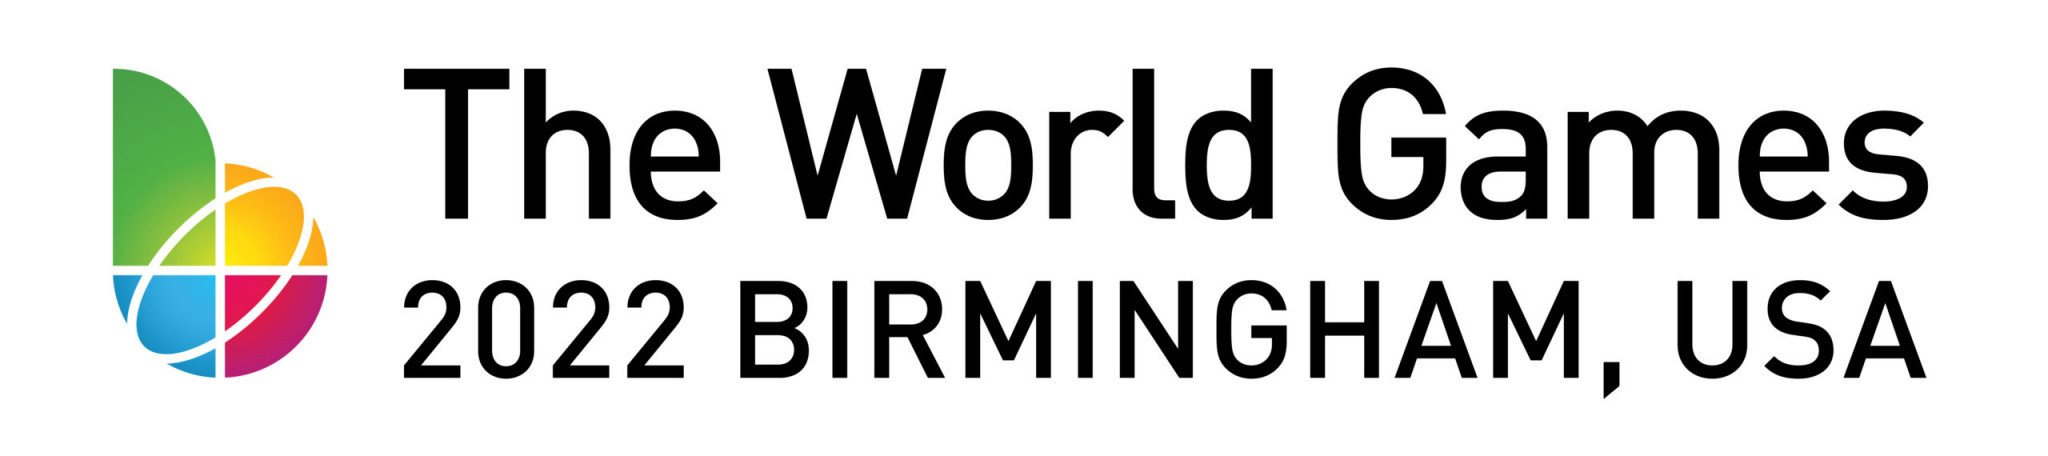 World Games host Birmingham named among top destinations to visit in 2022